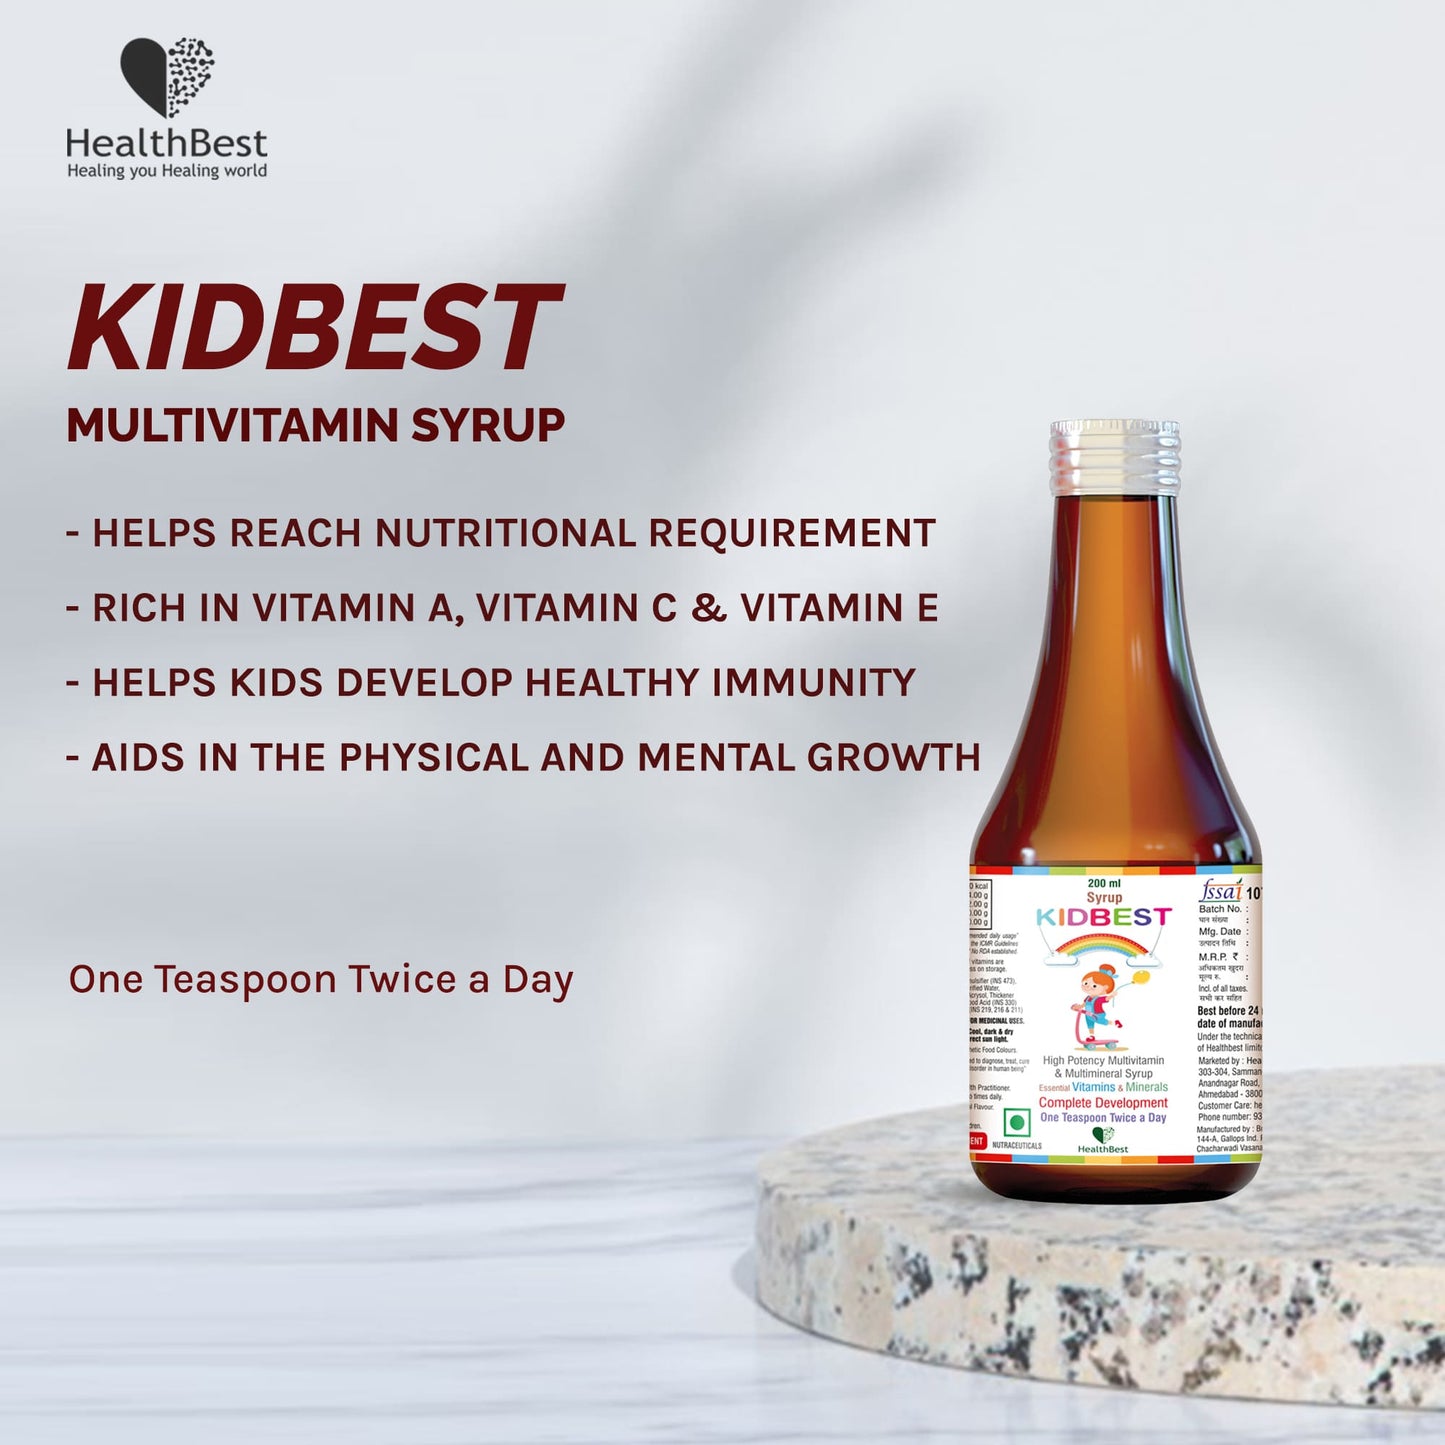 Multivitamin and Multimineral Syrup